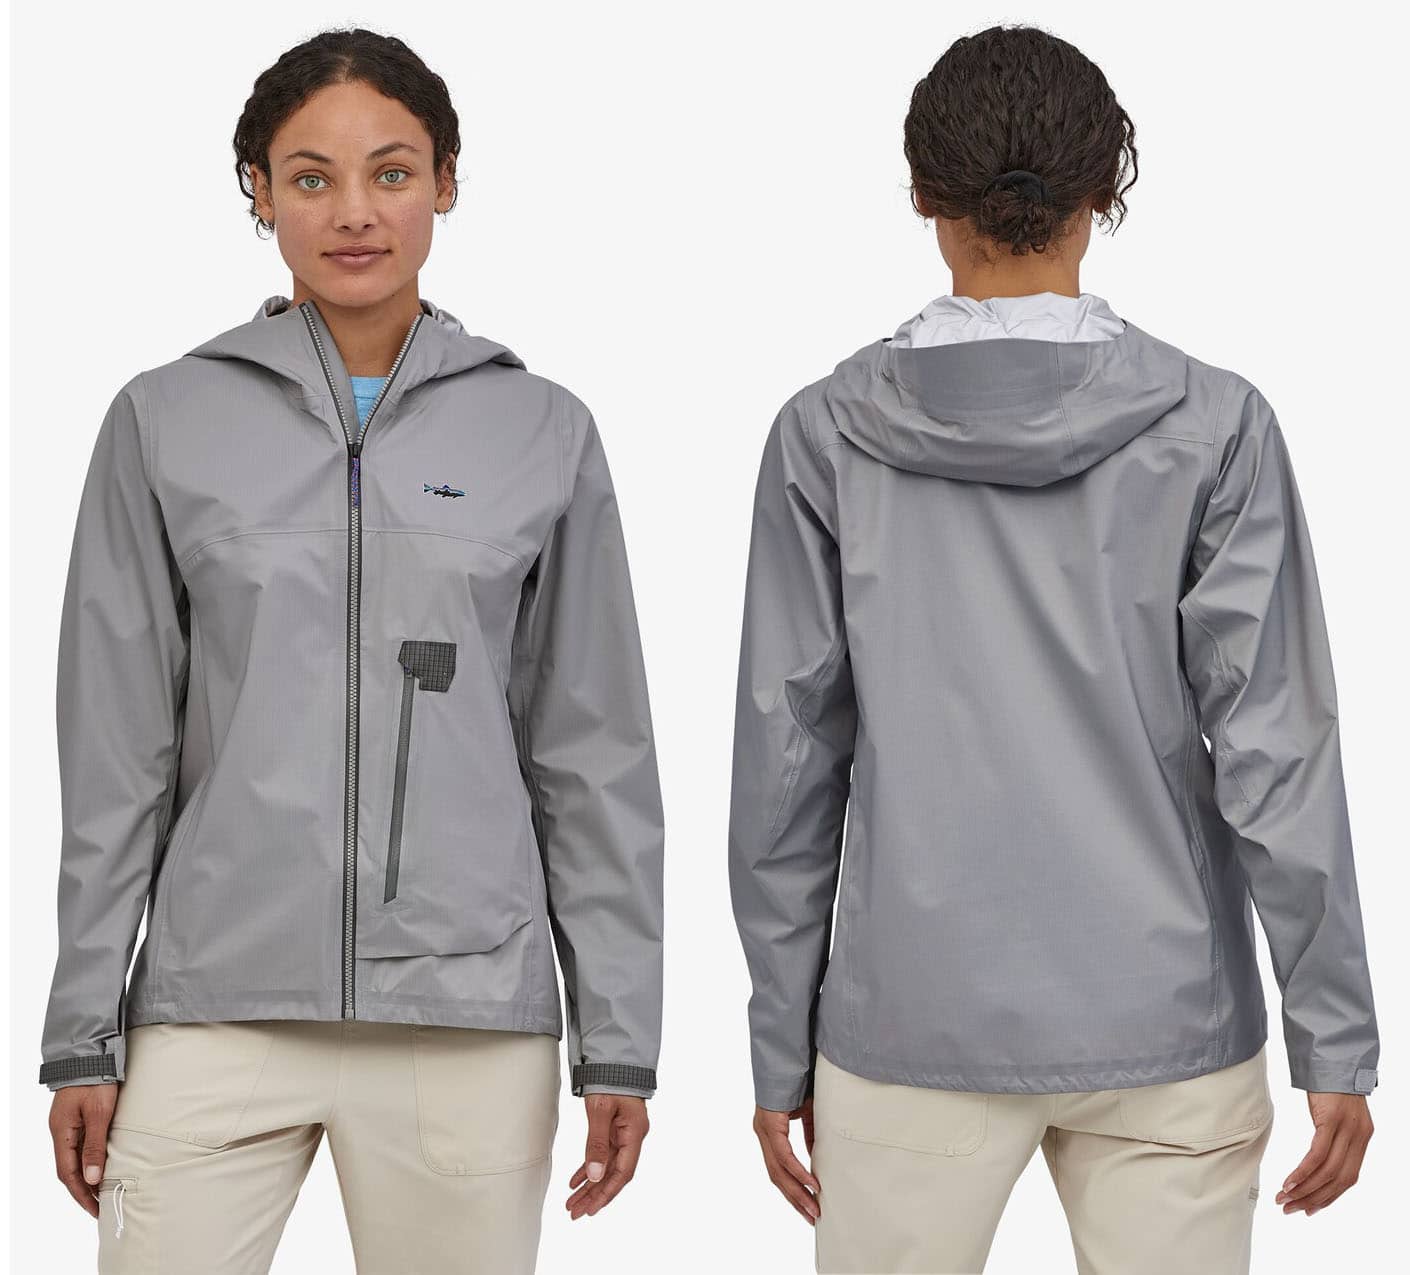 This minimalist go-everywhere jacket is breathable and waterproof to keep you dry and comfy